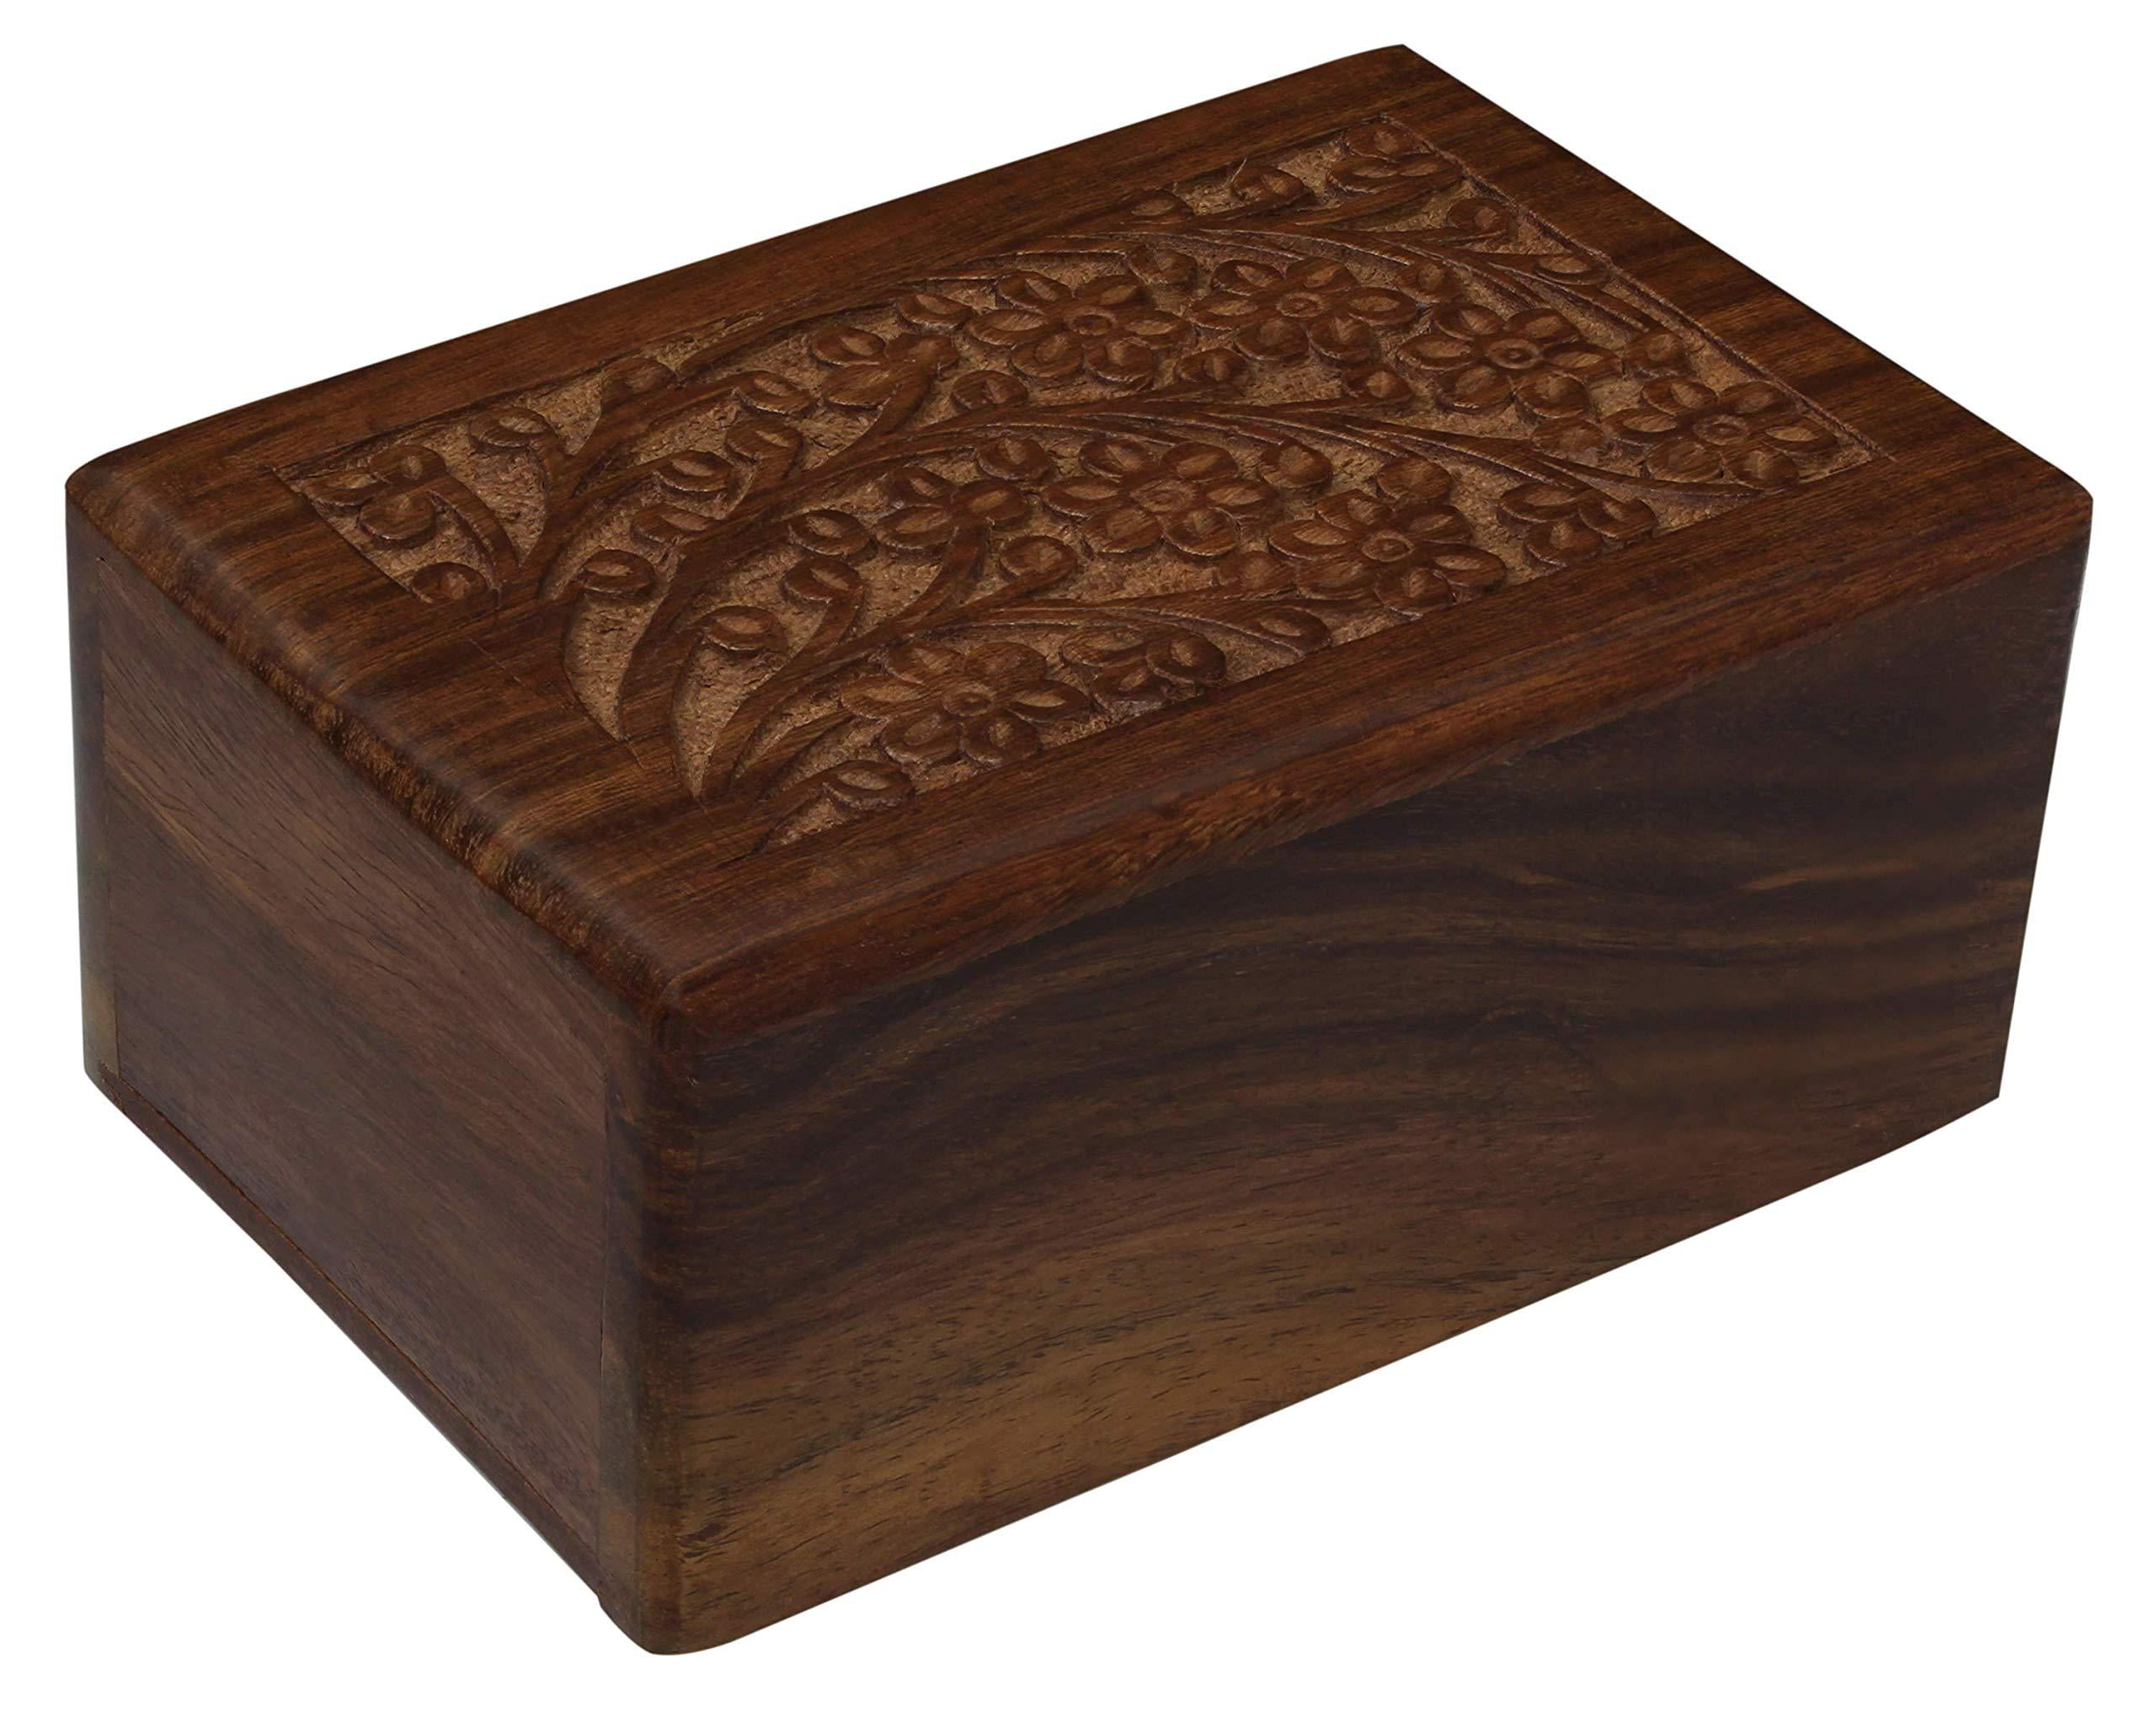 Something Different Tree of Life Box 15 x 10 x 6 cm Brown Wood